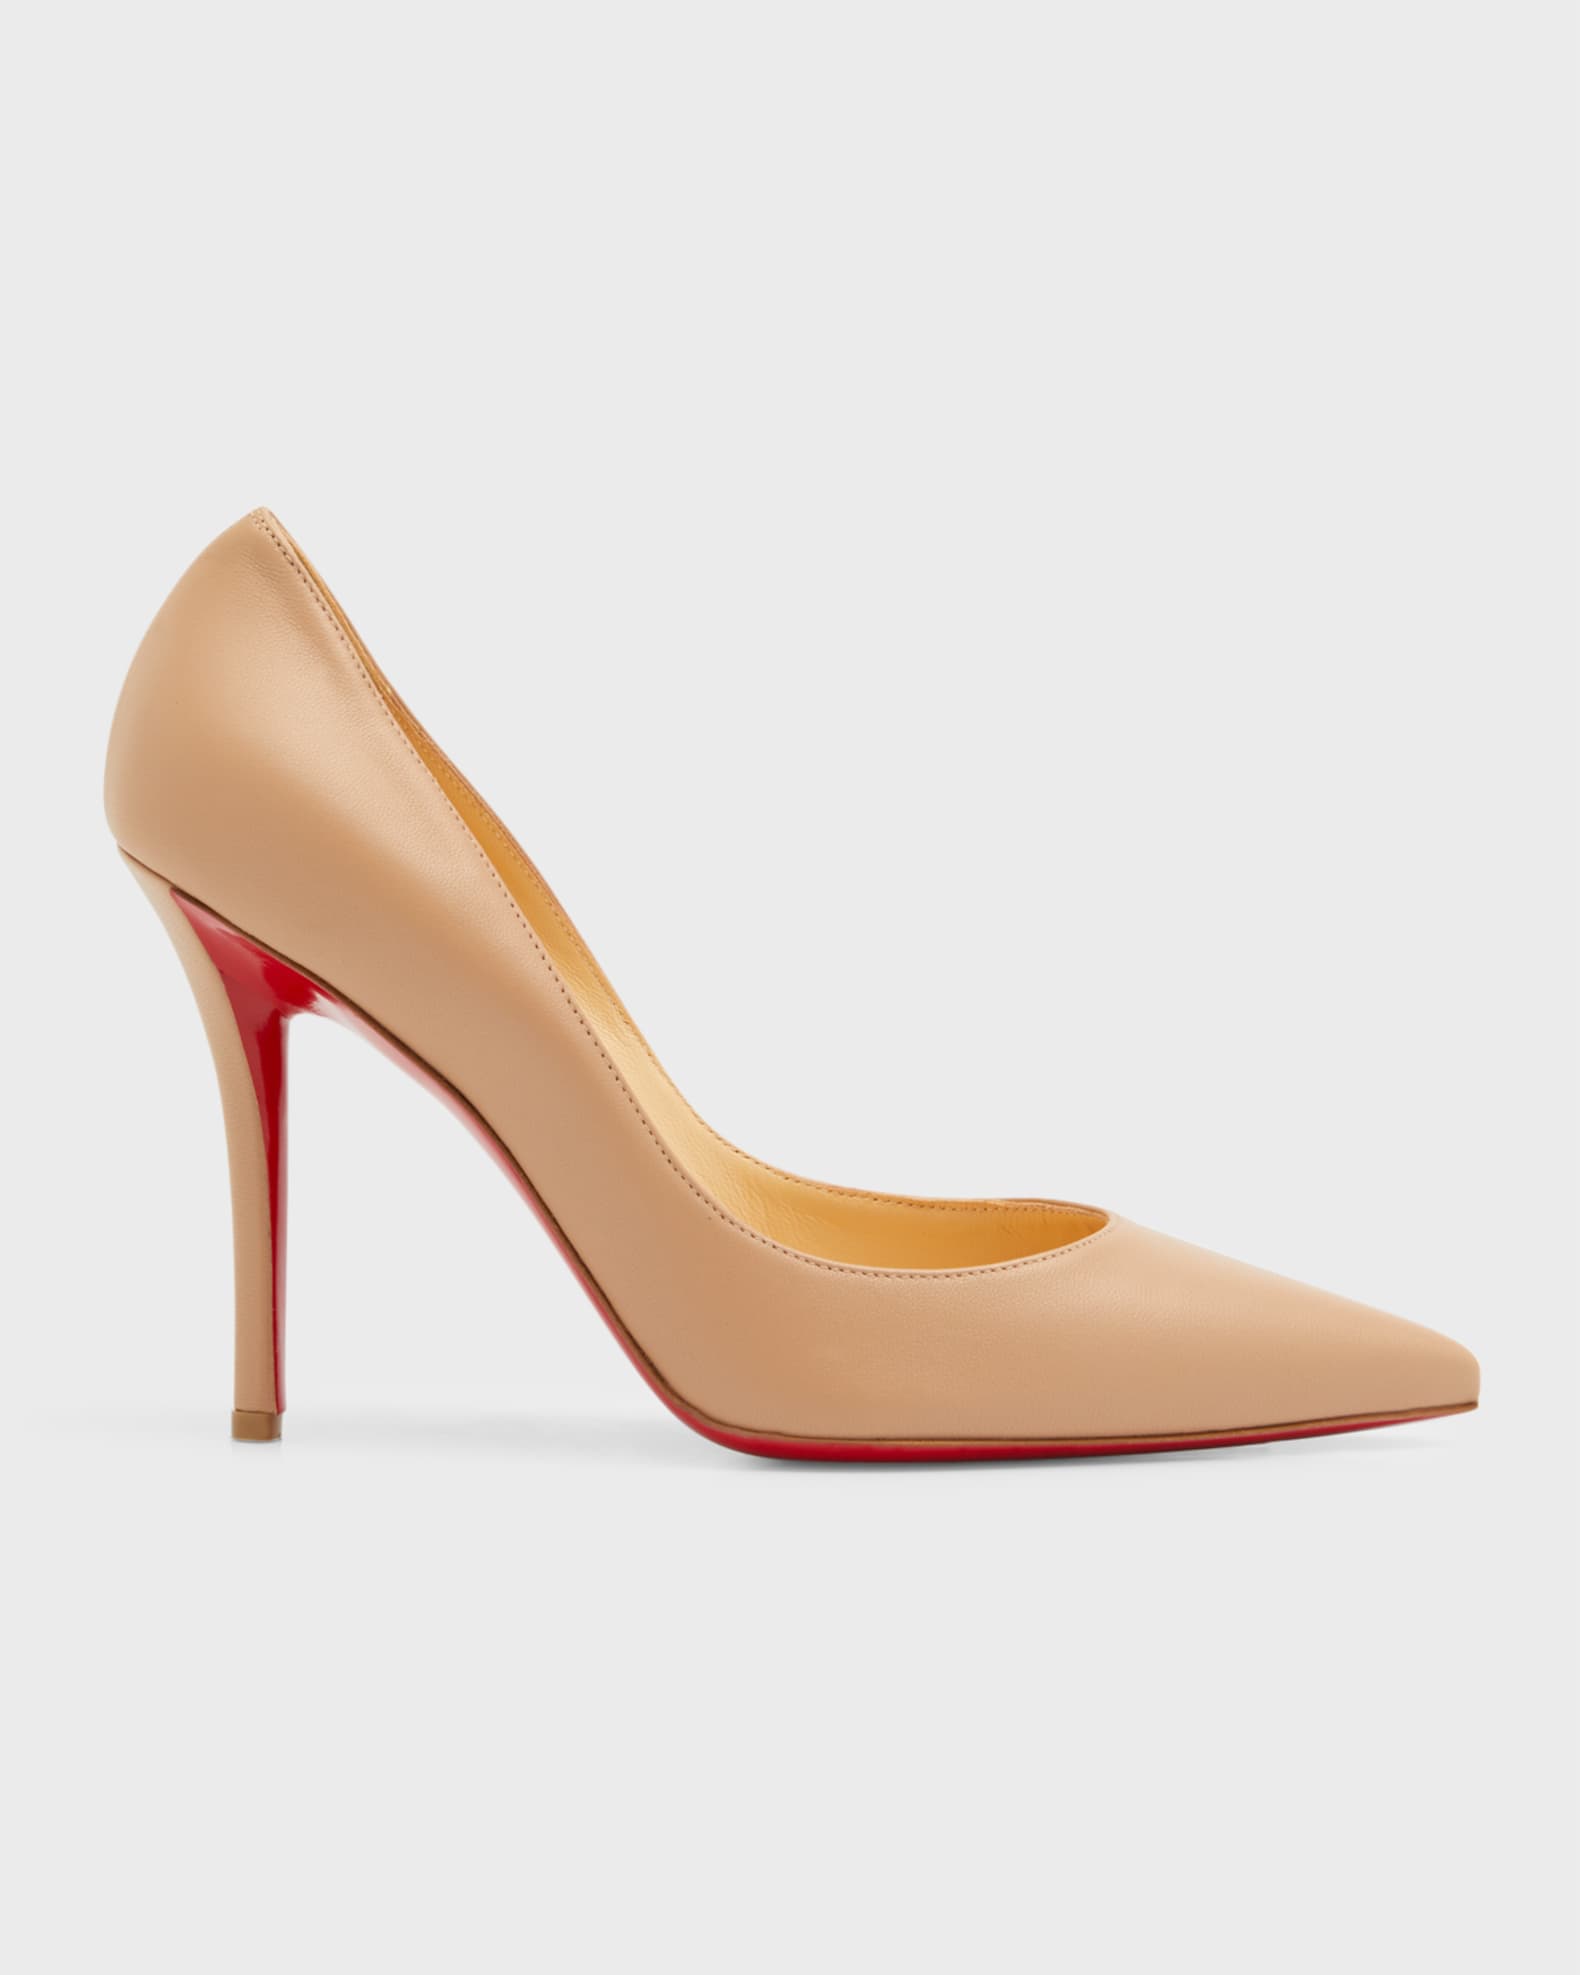 Christian Louboutin Apostrophy Leather Pointed Red Sole Pumps Neiman Marcus